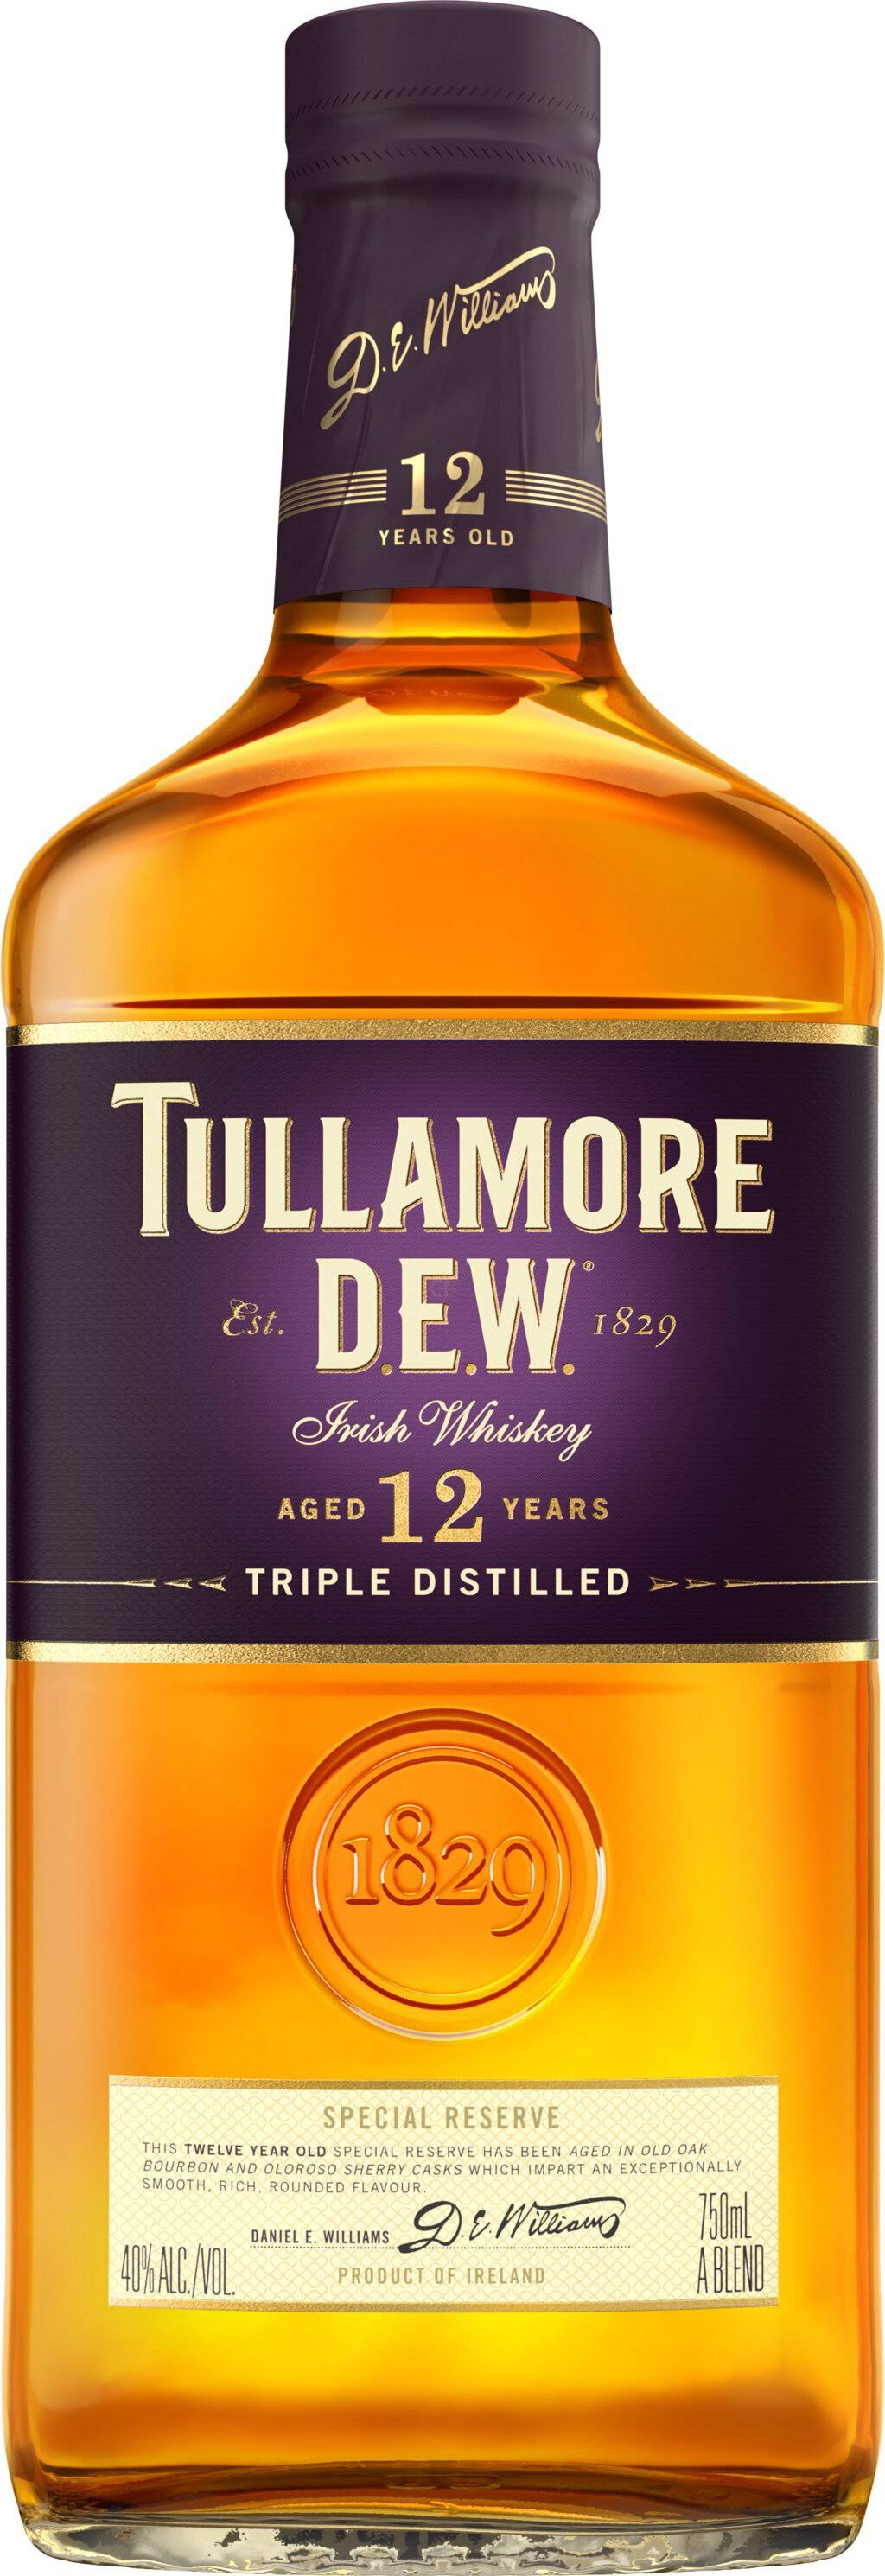 Tullamore Dew 12-Year-Old Special Reserve Irish Whiskey - 750ml